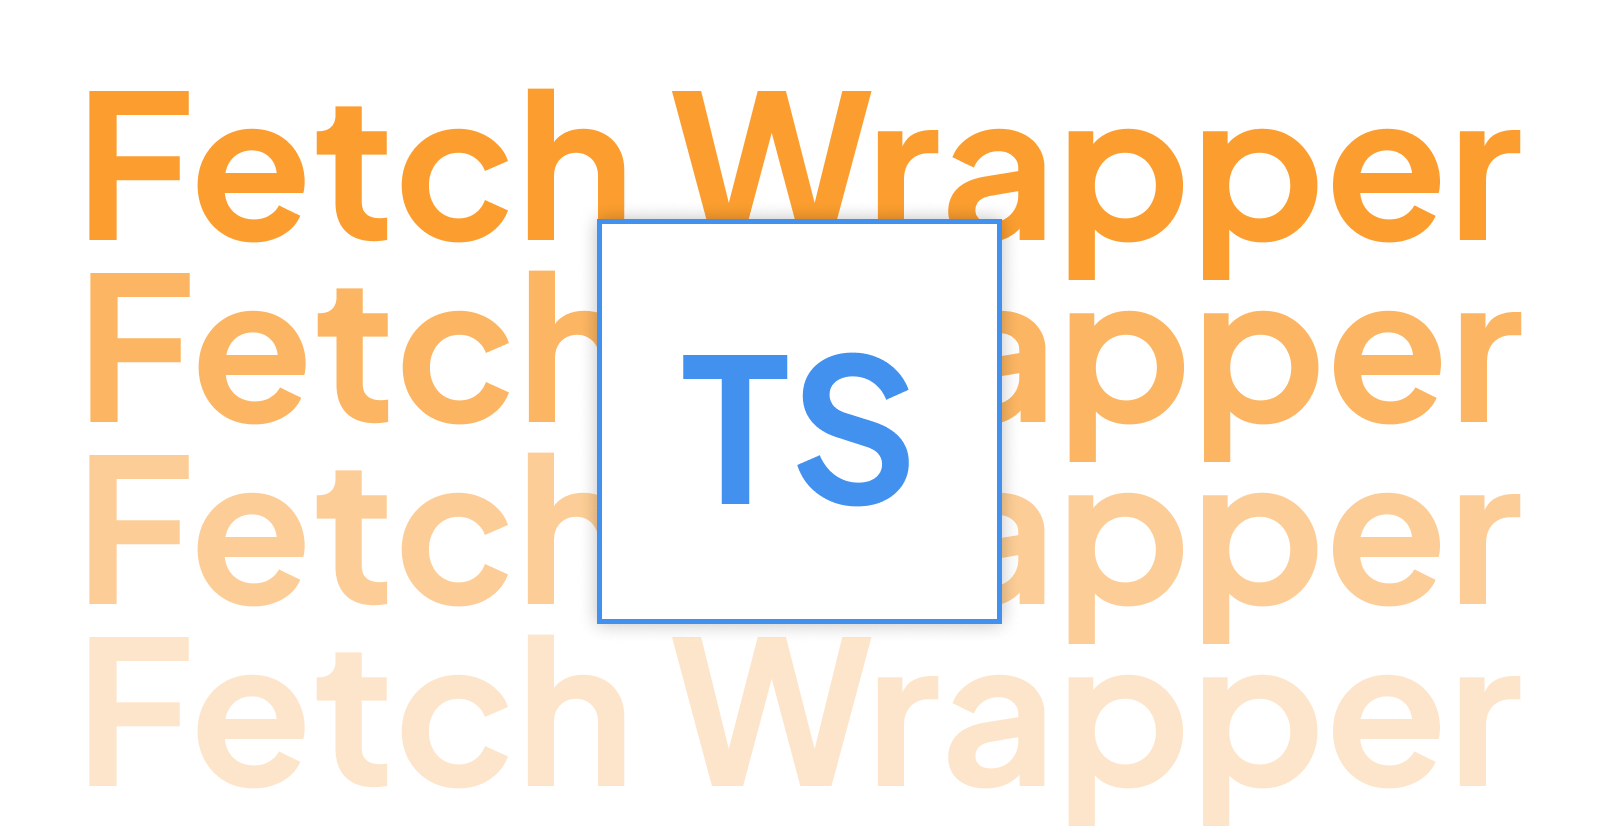 Fetch Wrapper for HTTP Requests in TypeScript